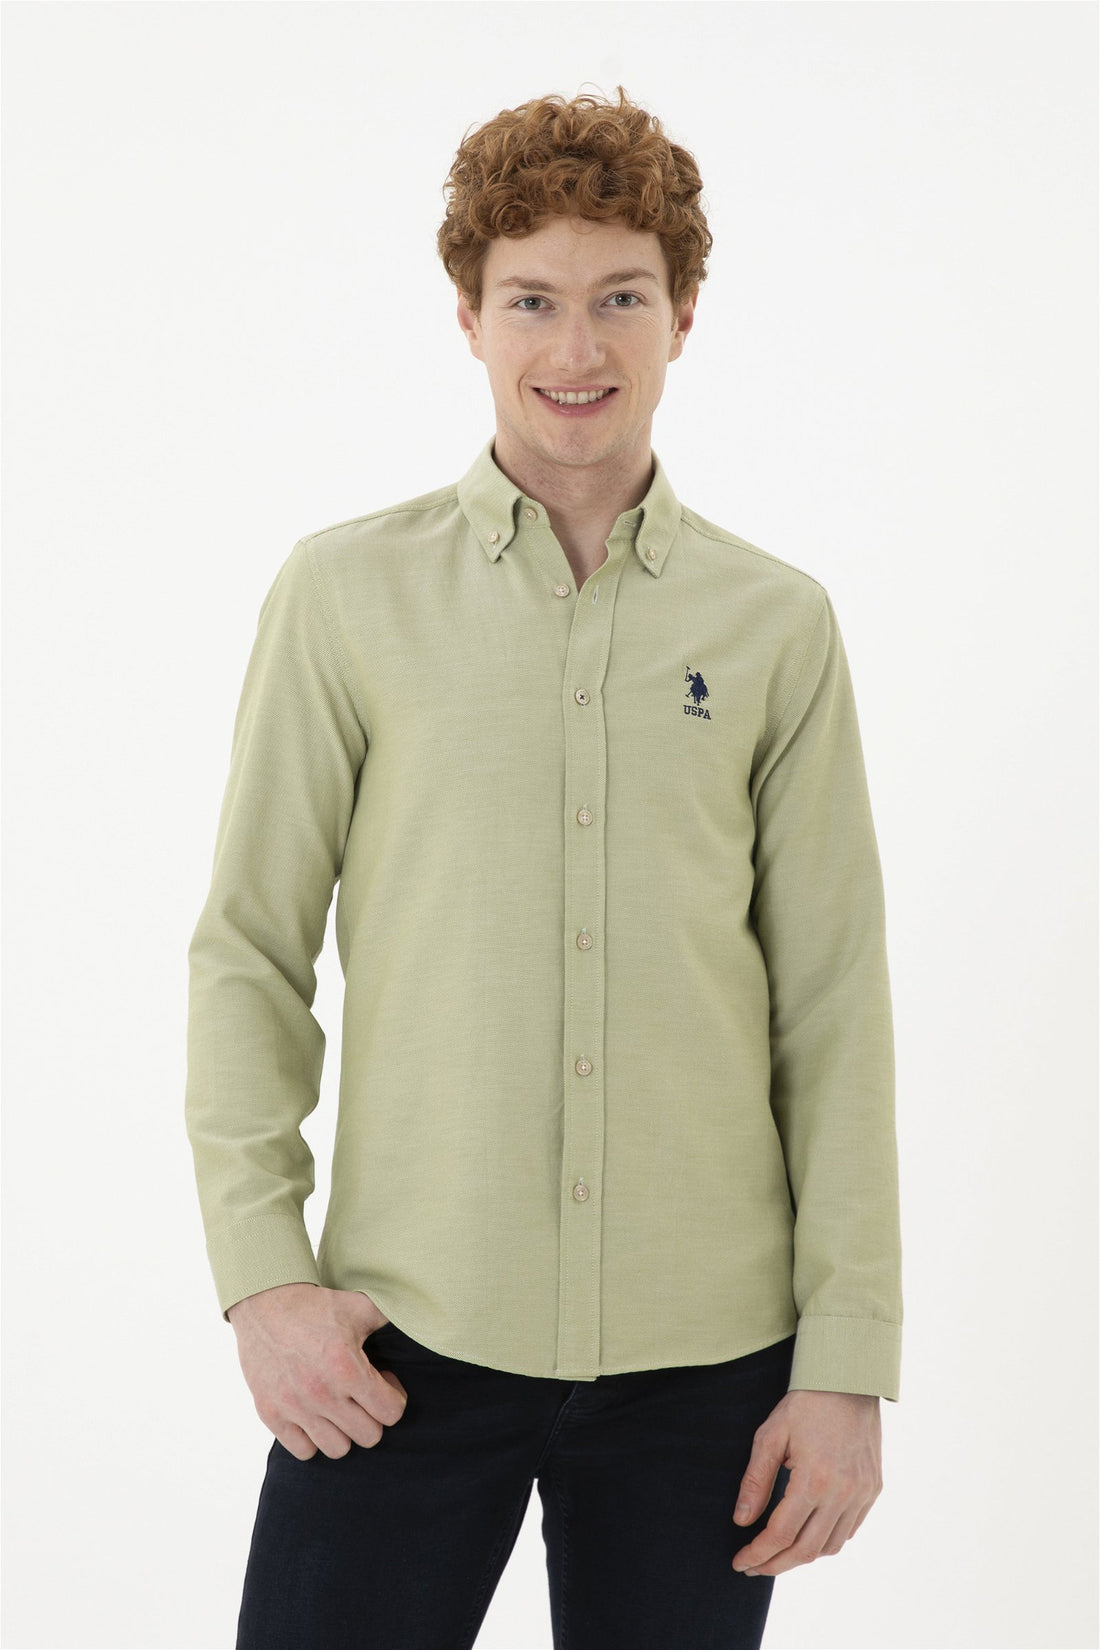 Button Down Shirt With Logo_G081GL0040 1886621_VR183_01